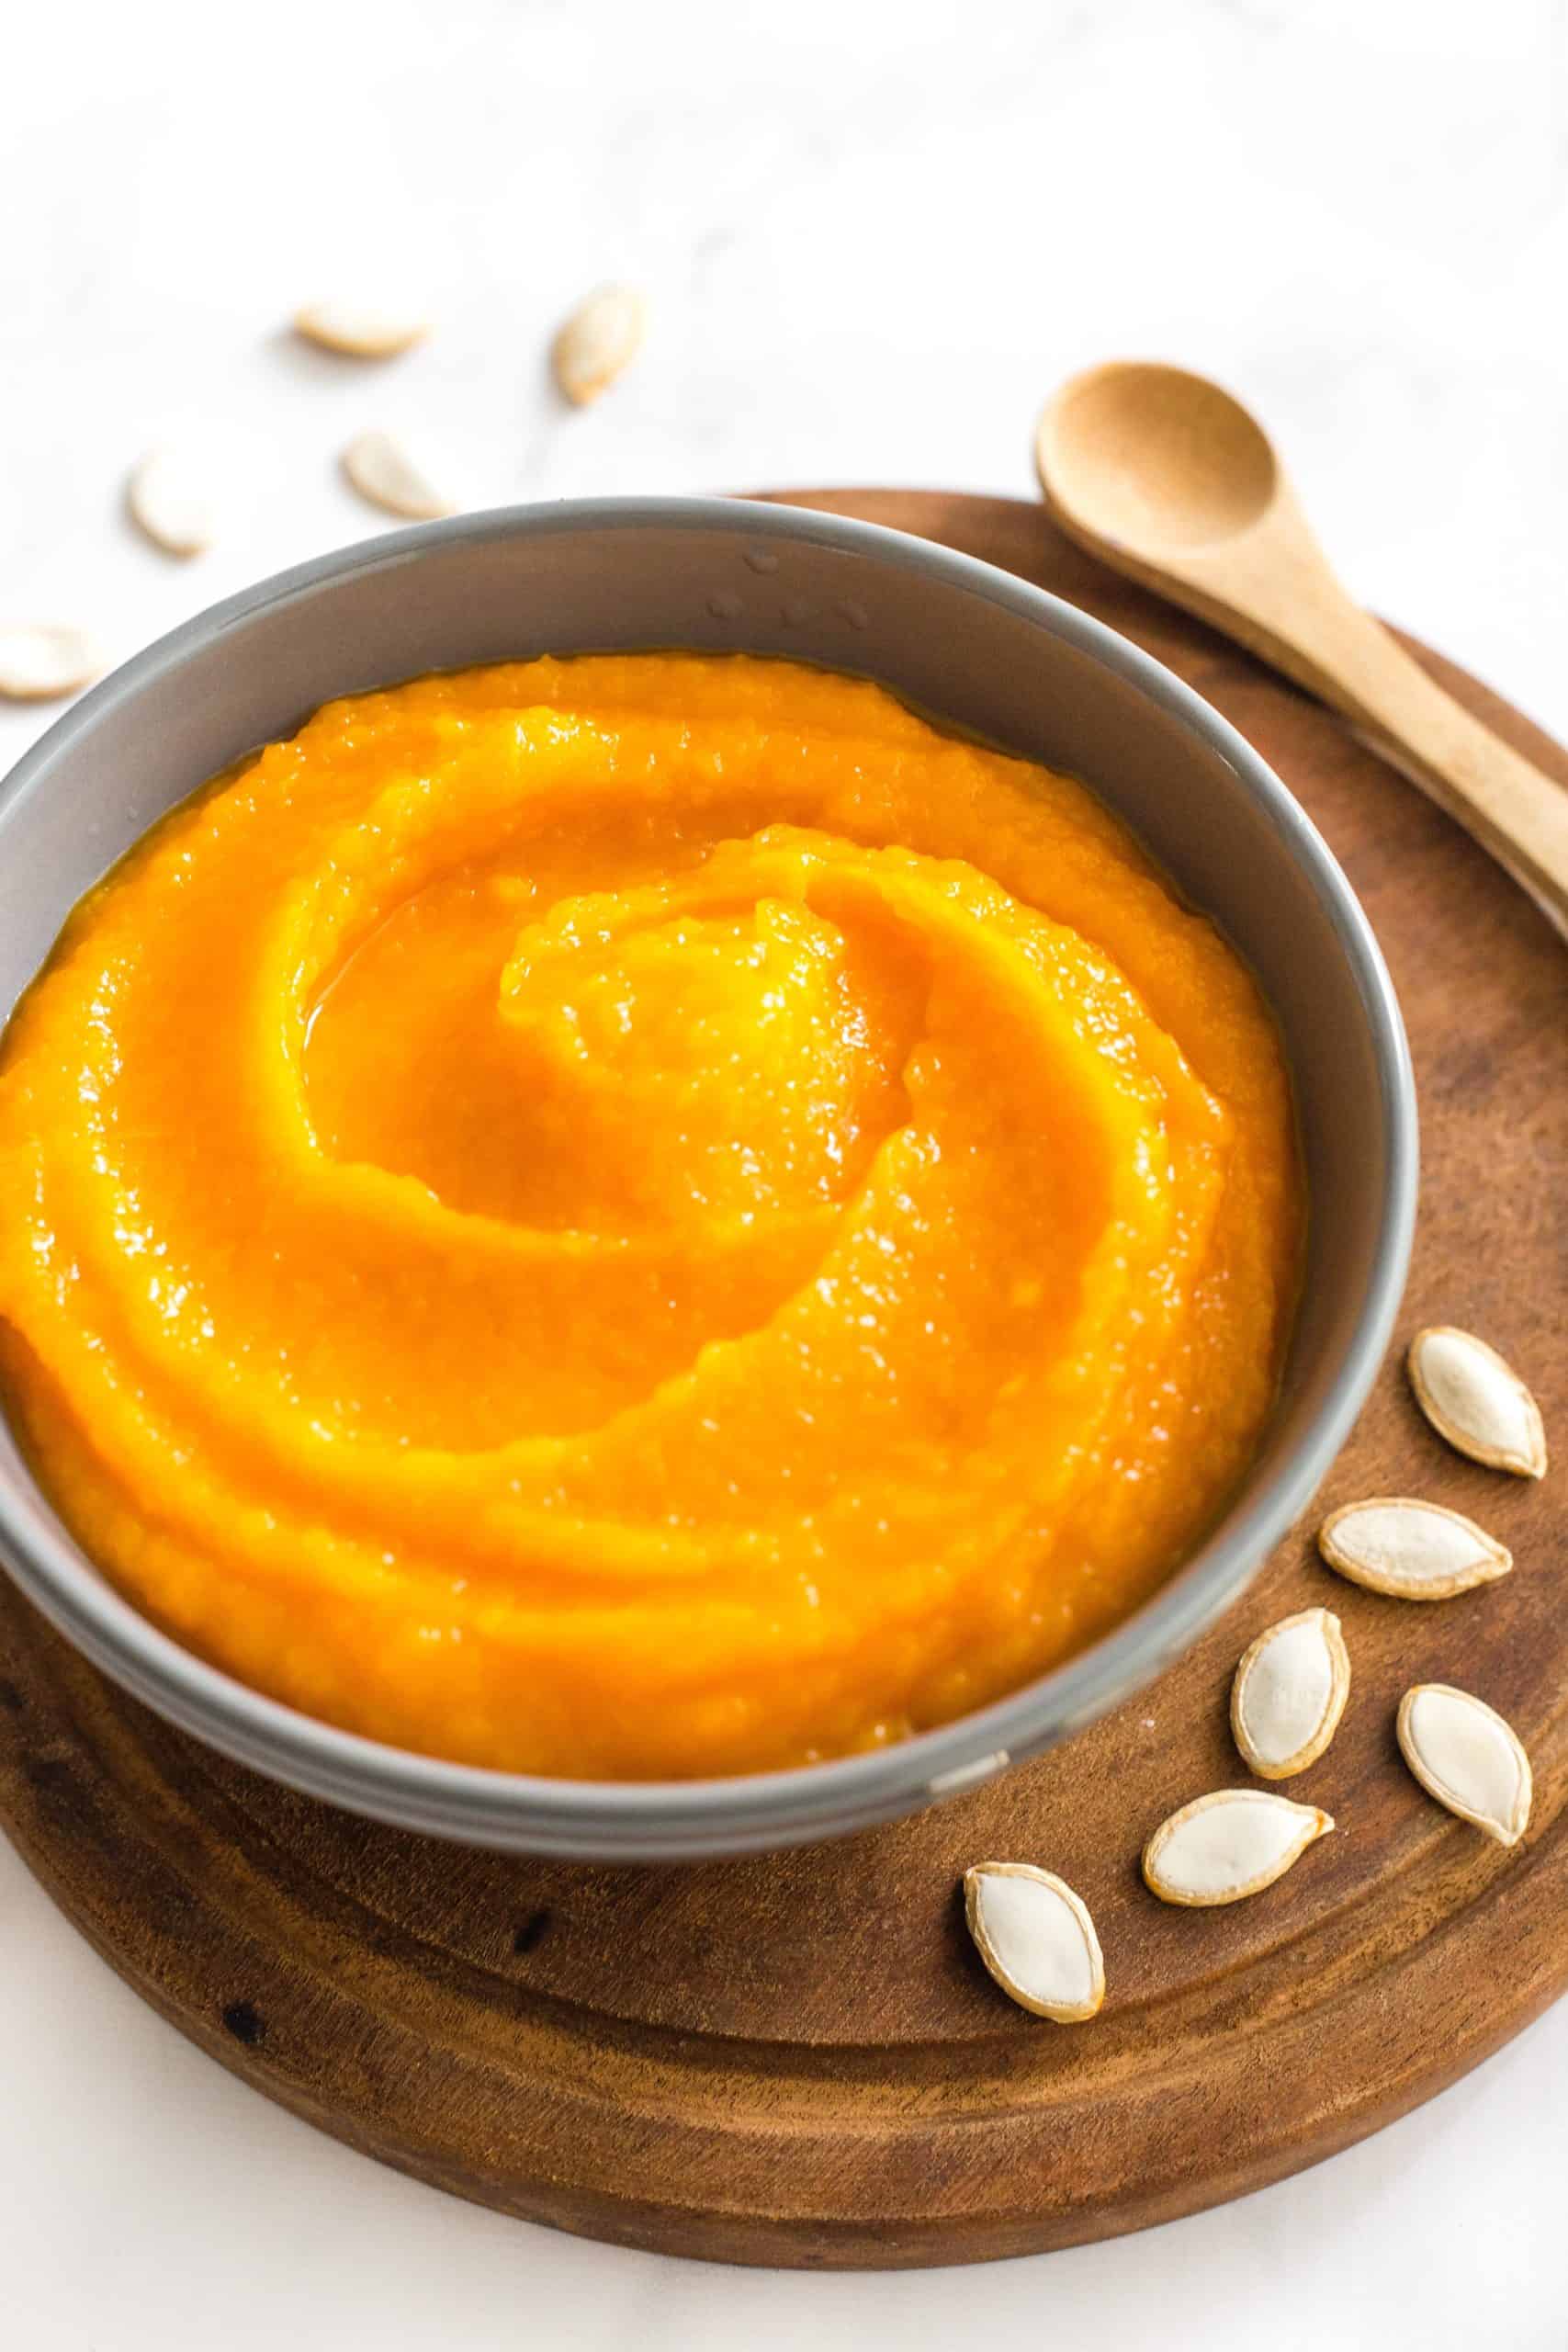 Pumpkin puree in a grey bowl on a round wooden board.